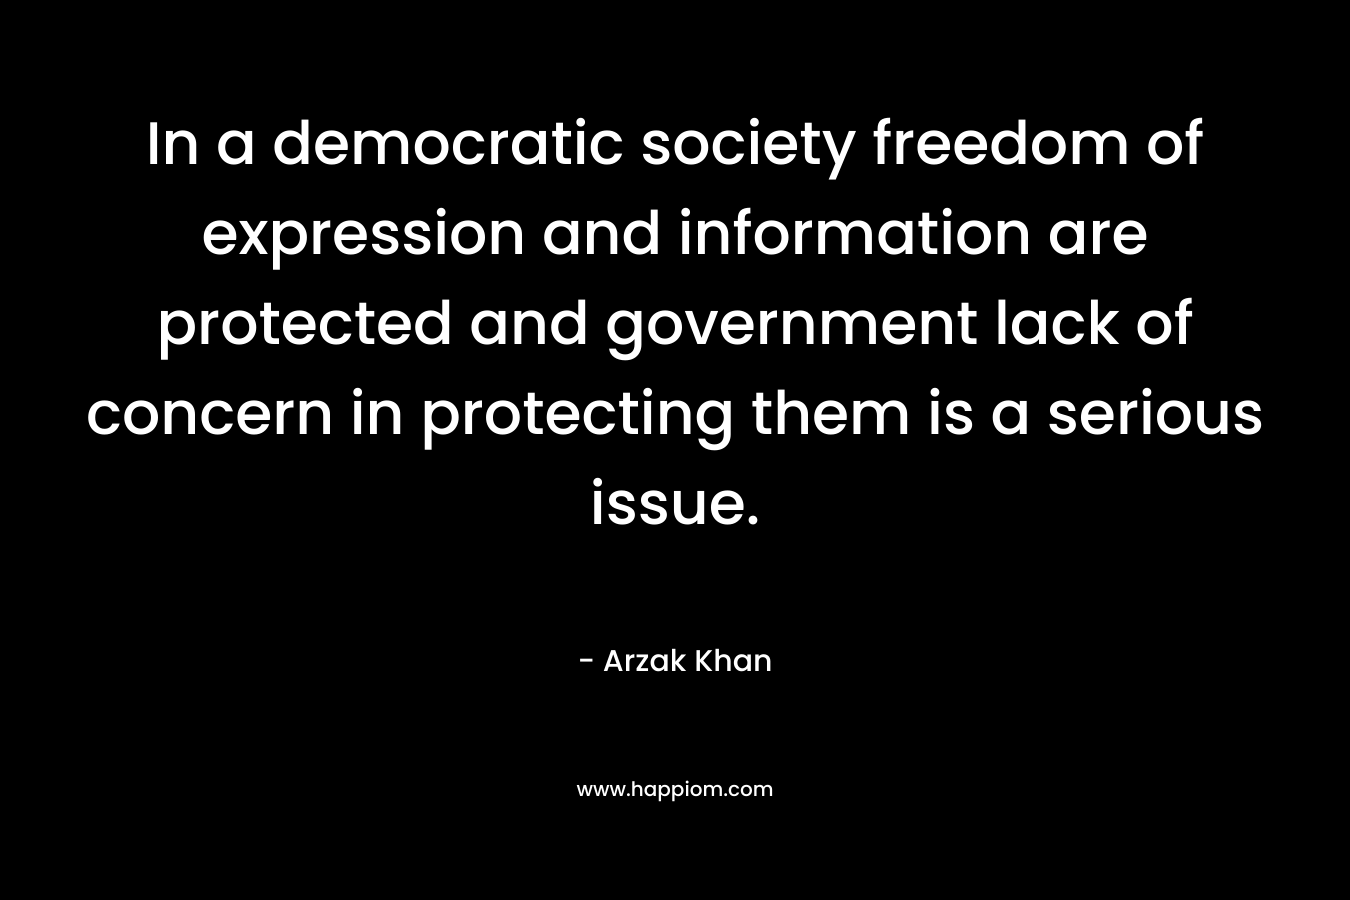 In a democratic society freedom of expression and information are protected and government lack of concern in protecting them is a serious issue.